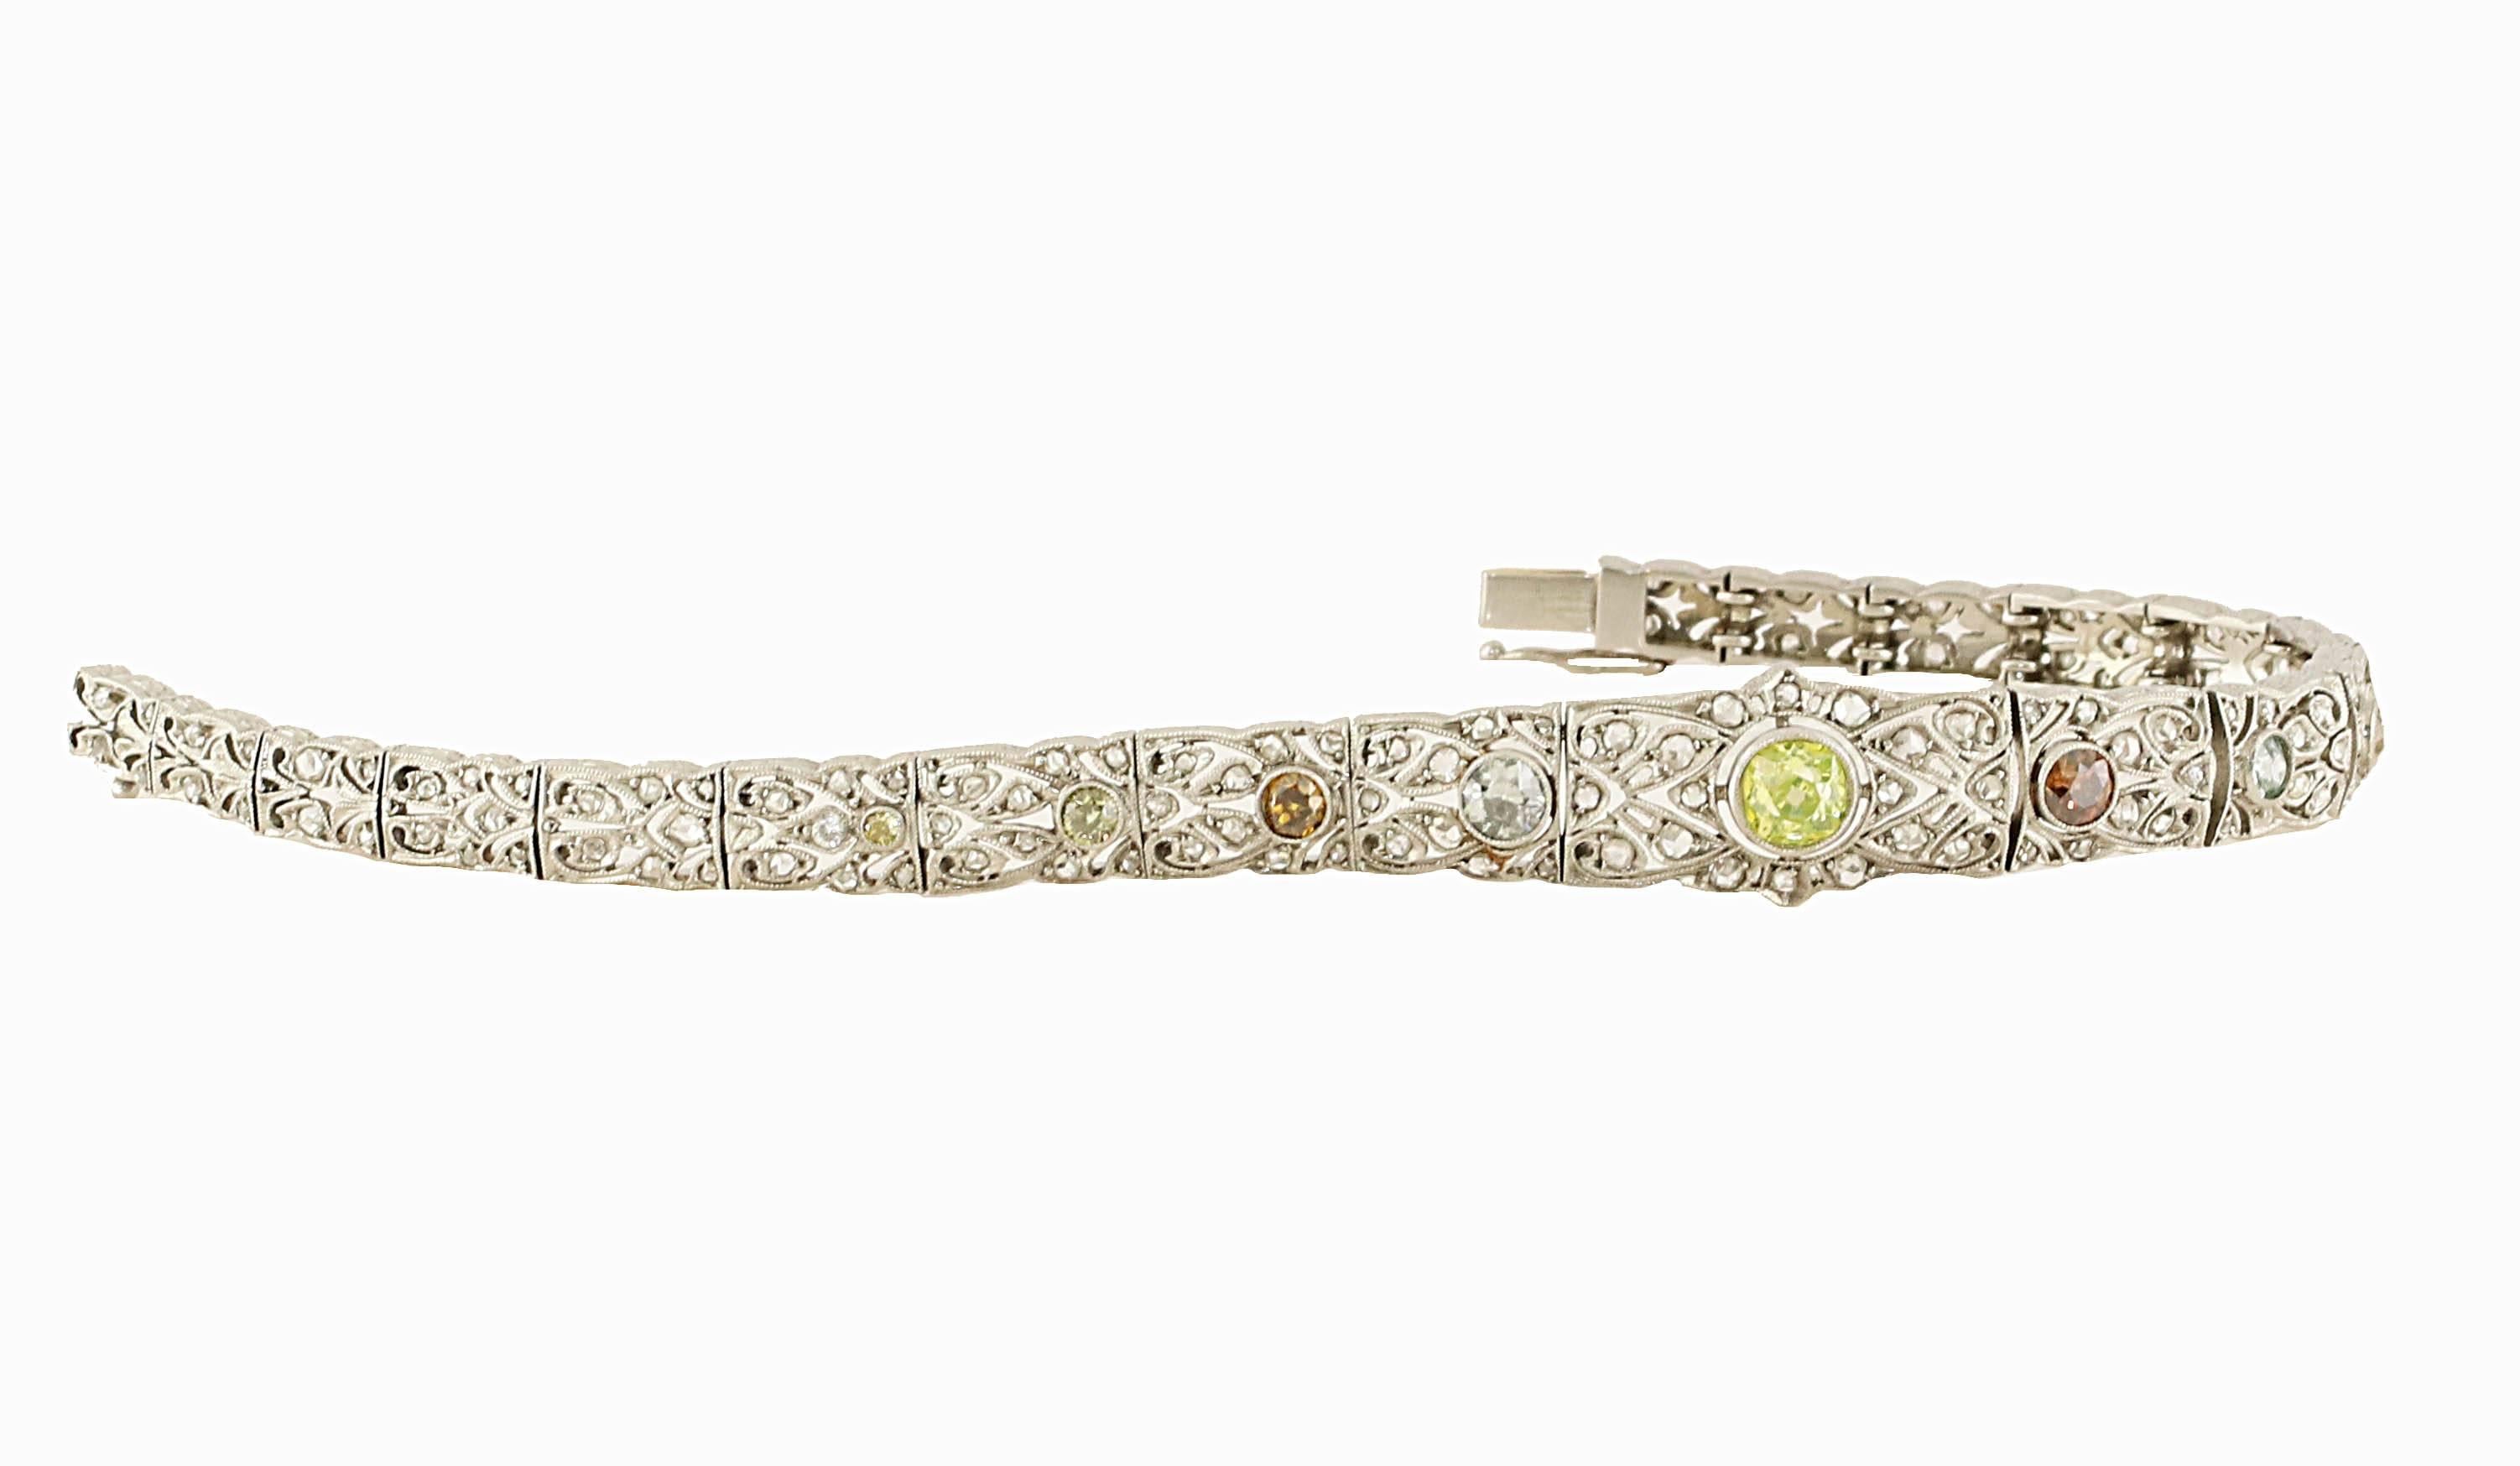 A timeless 18kt art-deco bracelet with intricate detail and workmanship . There are 9 exquisite NATURAL colored diamonds. The colors range from shades of yellow, oranges and blue. 
The center stone is about +/- 0.50ct. 
small white diamonds total